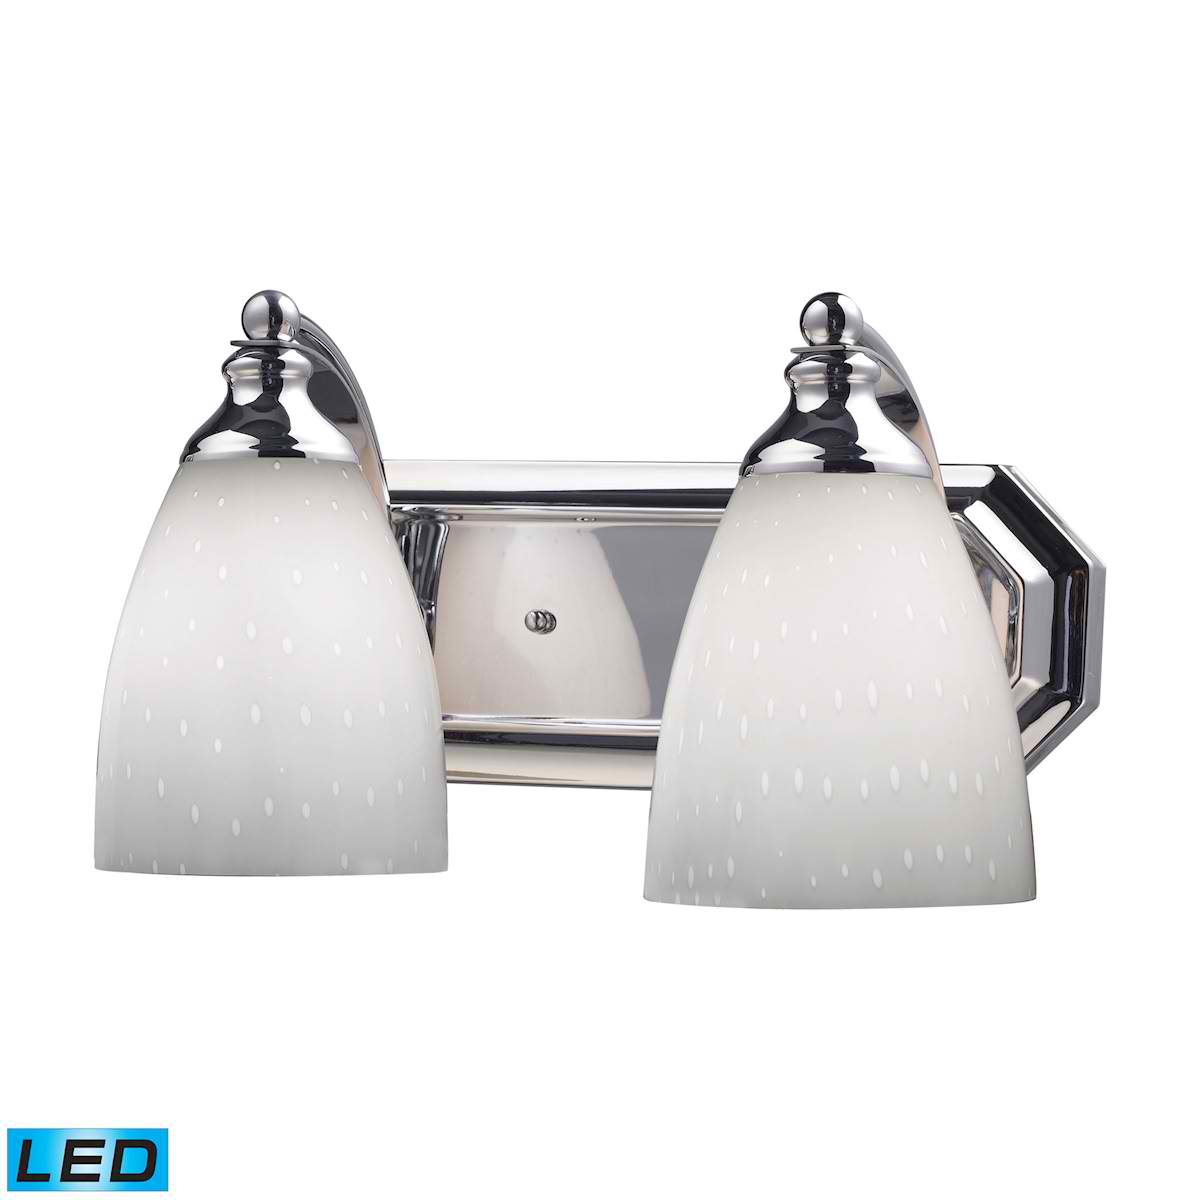 2 Light Vanity in Polished Chrome and Simply White Glass - LED, 800 Lumens (1600 Lumens Total) With Full Scale